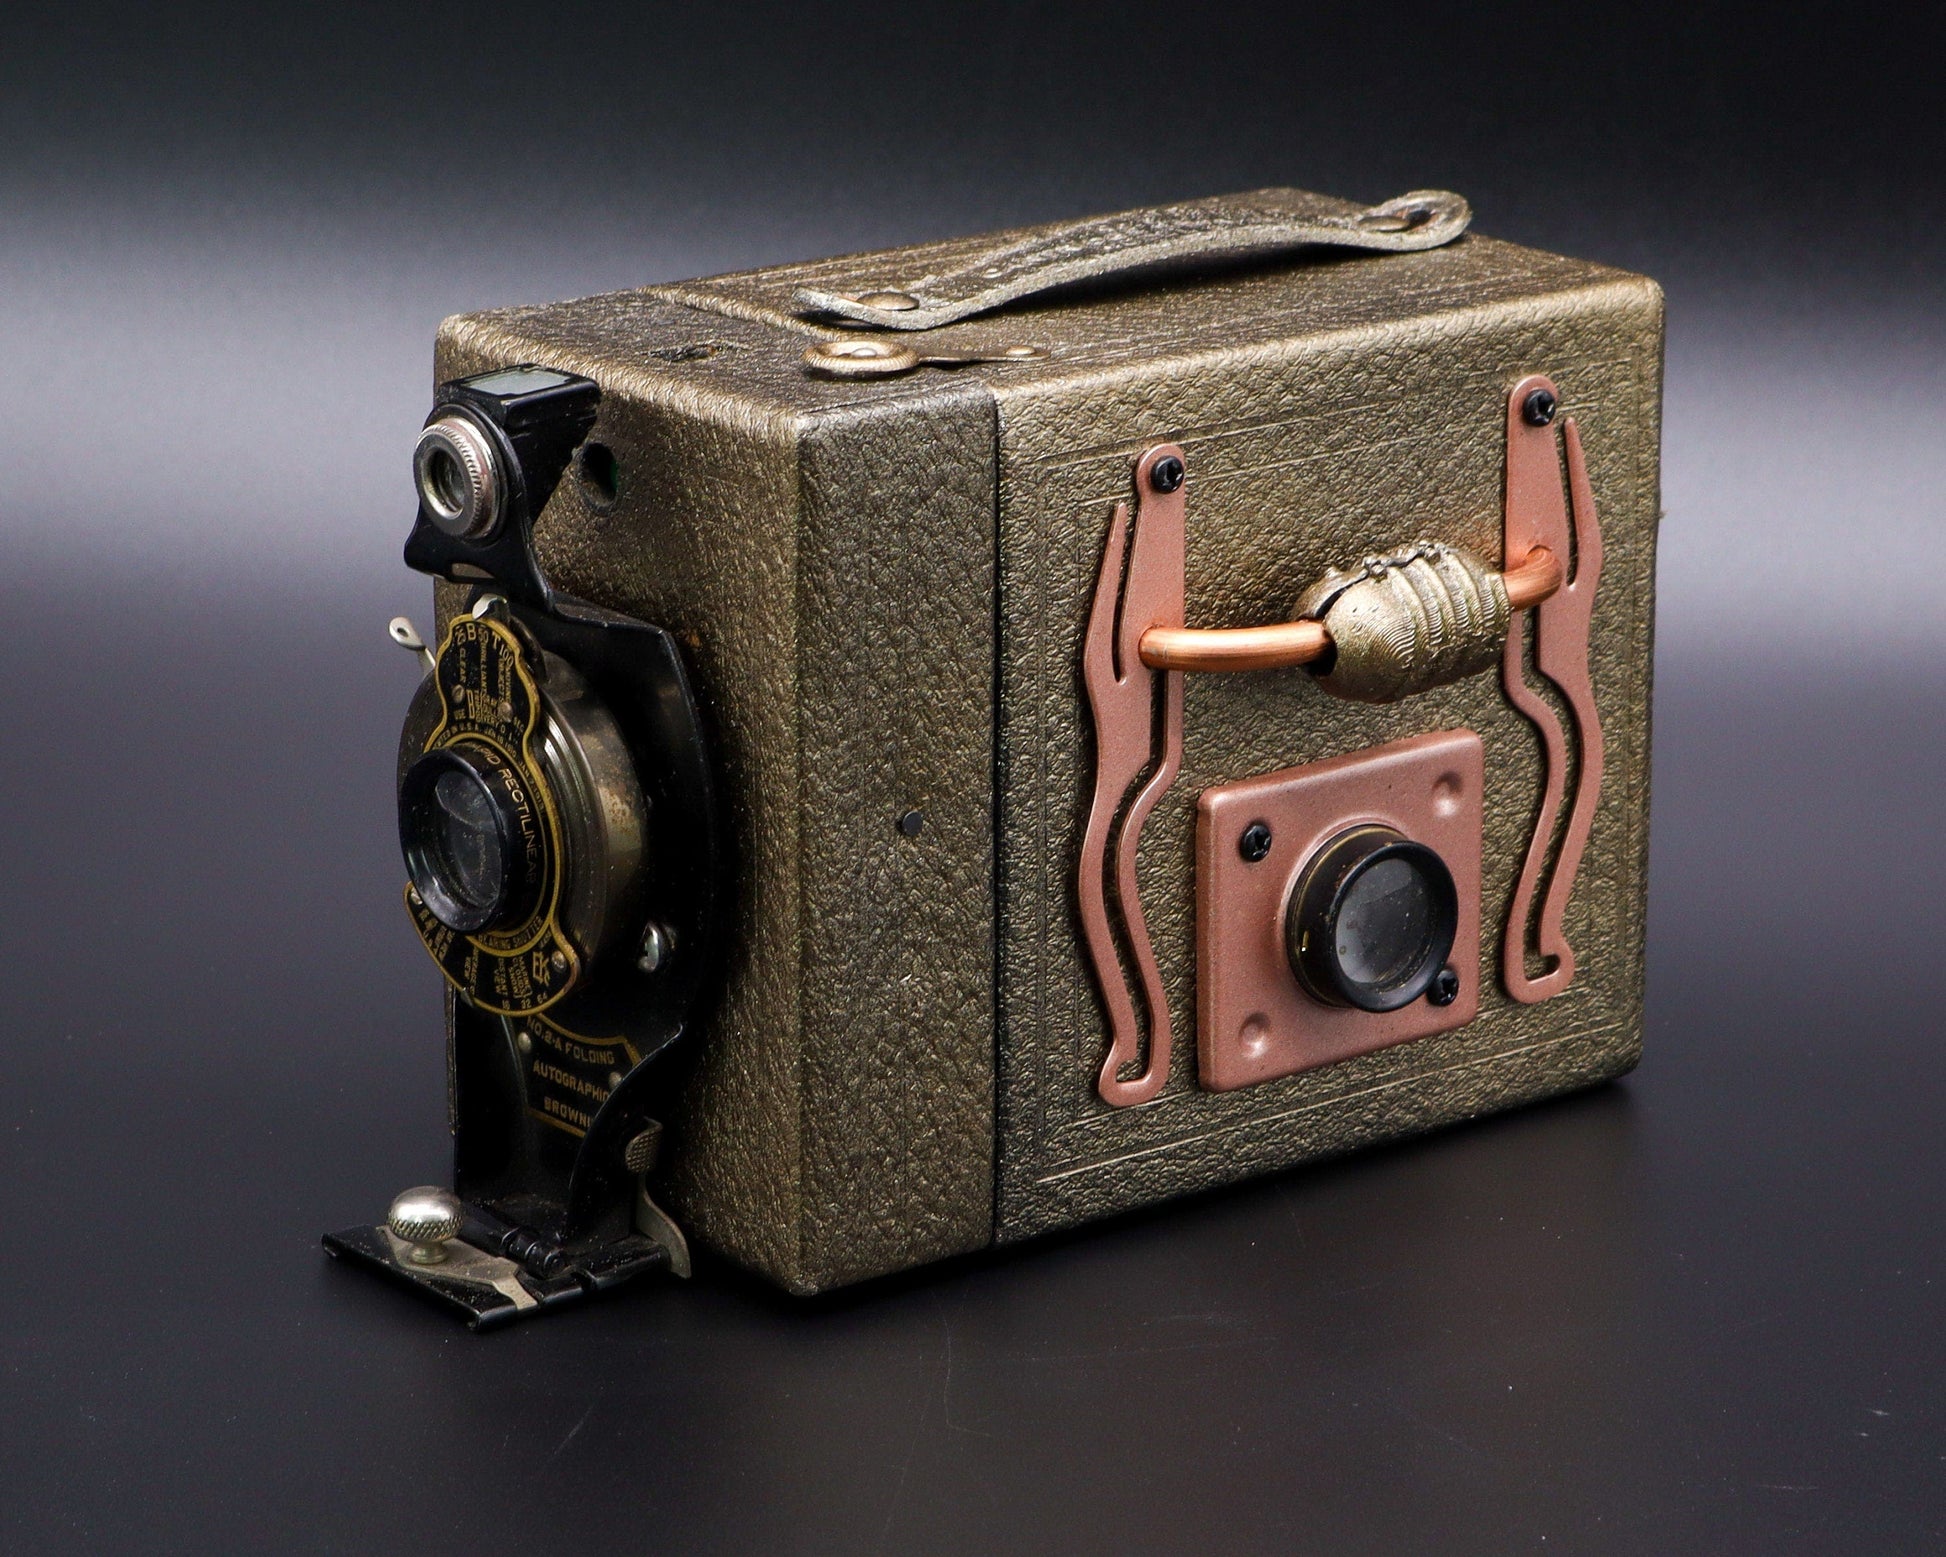 LightAndTimeArt Steampunk Speaker Steampunk Wireless Bluetooth Speaker, Kodak Box Camera, Gifts for Geeks, Electronic Audio gadget for him and her, signed & numbered artwork